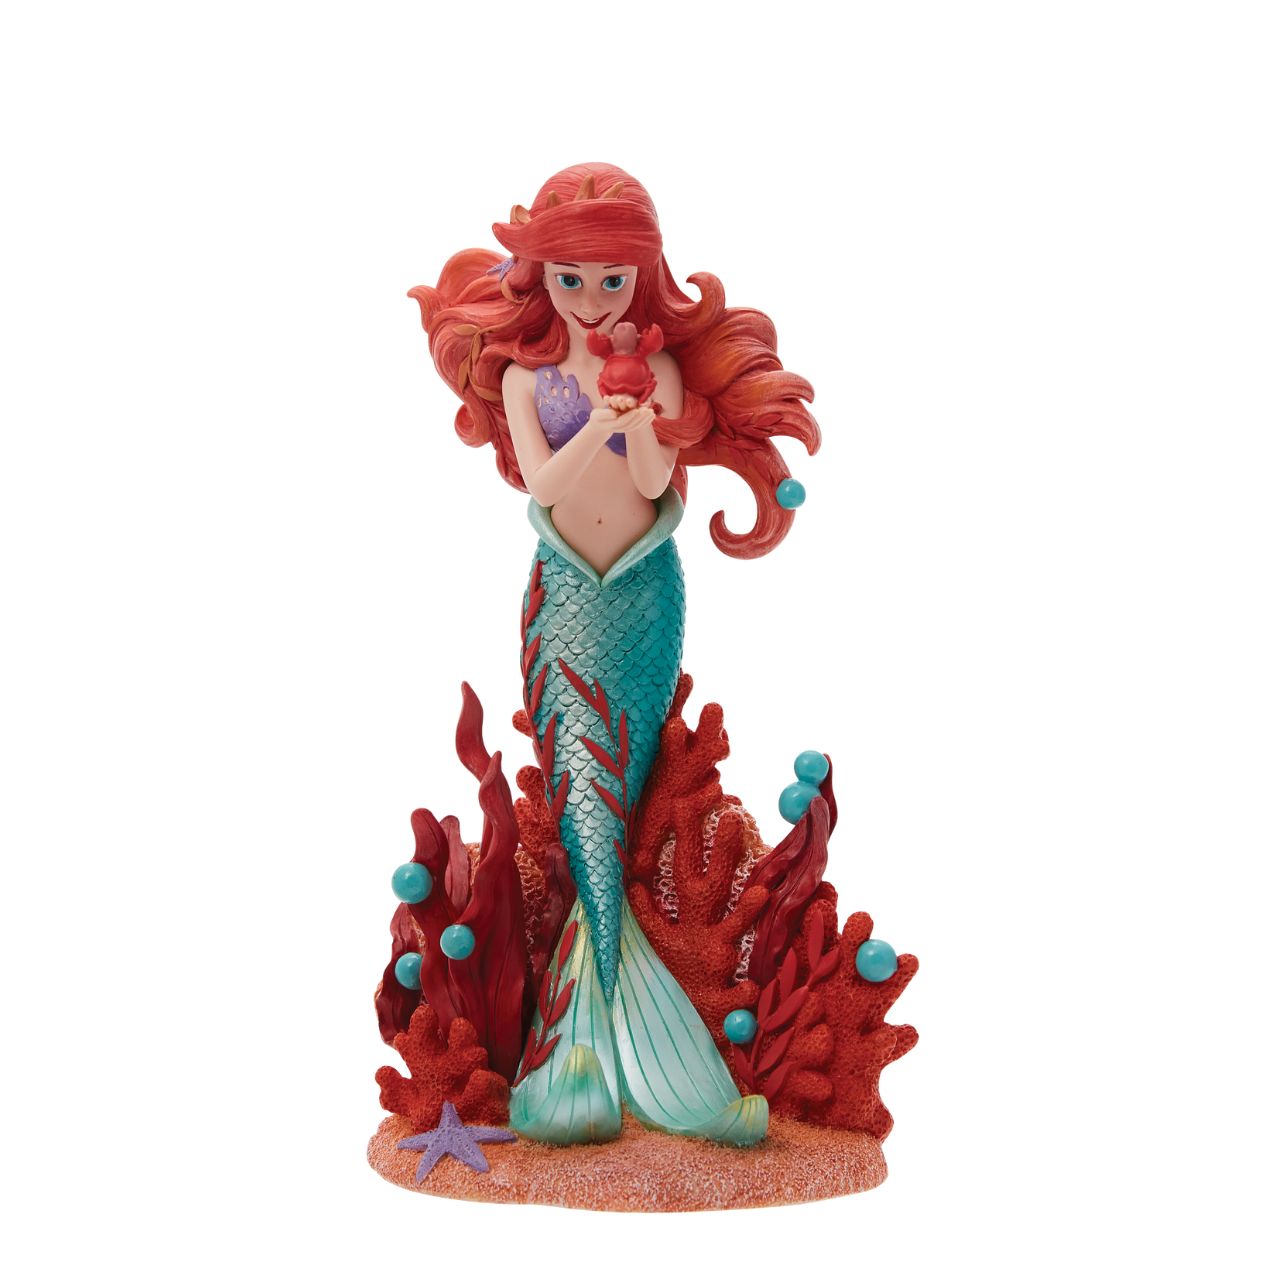 Ariel joins the Disney Showcase Botanical collection in honour of the film's 35th Anniversary featuring sea florals and coral (which is the 35th Anniversary gift). Ariel holds a small Sabastian in her delicate hands as she listens intently to his story. A vibrant base of coral, sand and rising bubbles encapsulates the underwater princess.